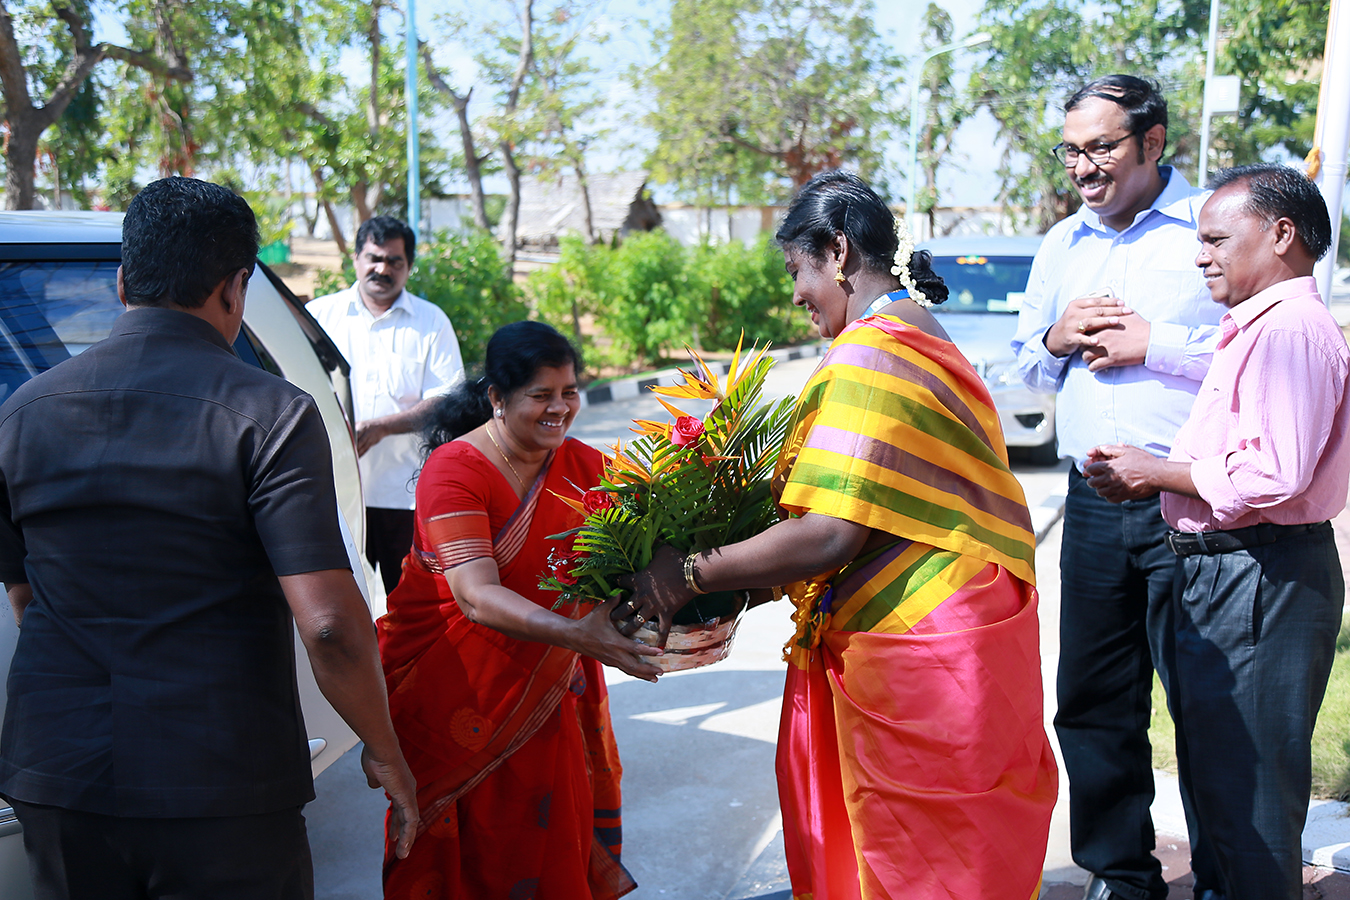 Smt. J. Mercykutty Amma, Honourable Minister of Fisheries , Govt. of Kerala visited ICAR- Central Institute of Brackishwater Aquaculture (CIBA), Chennai on 13th February, 2017